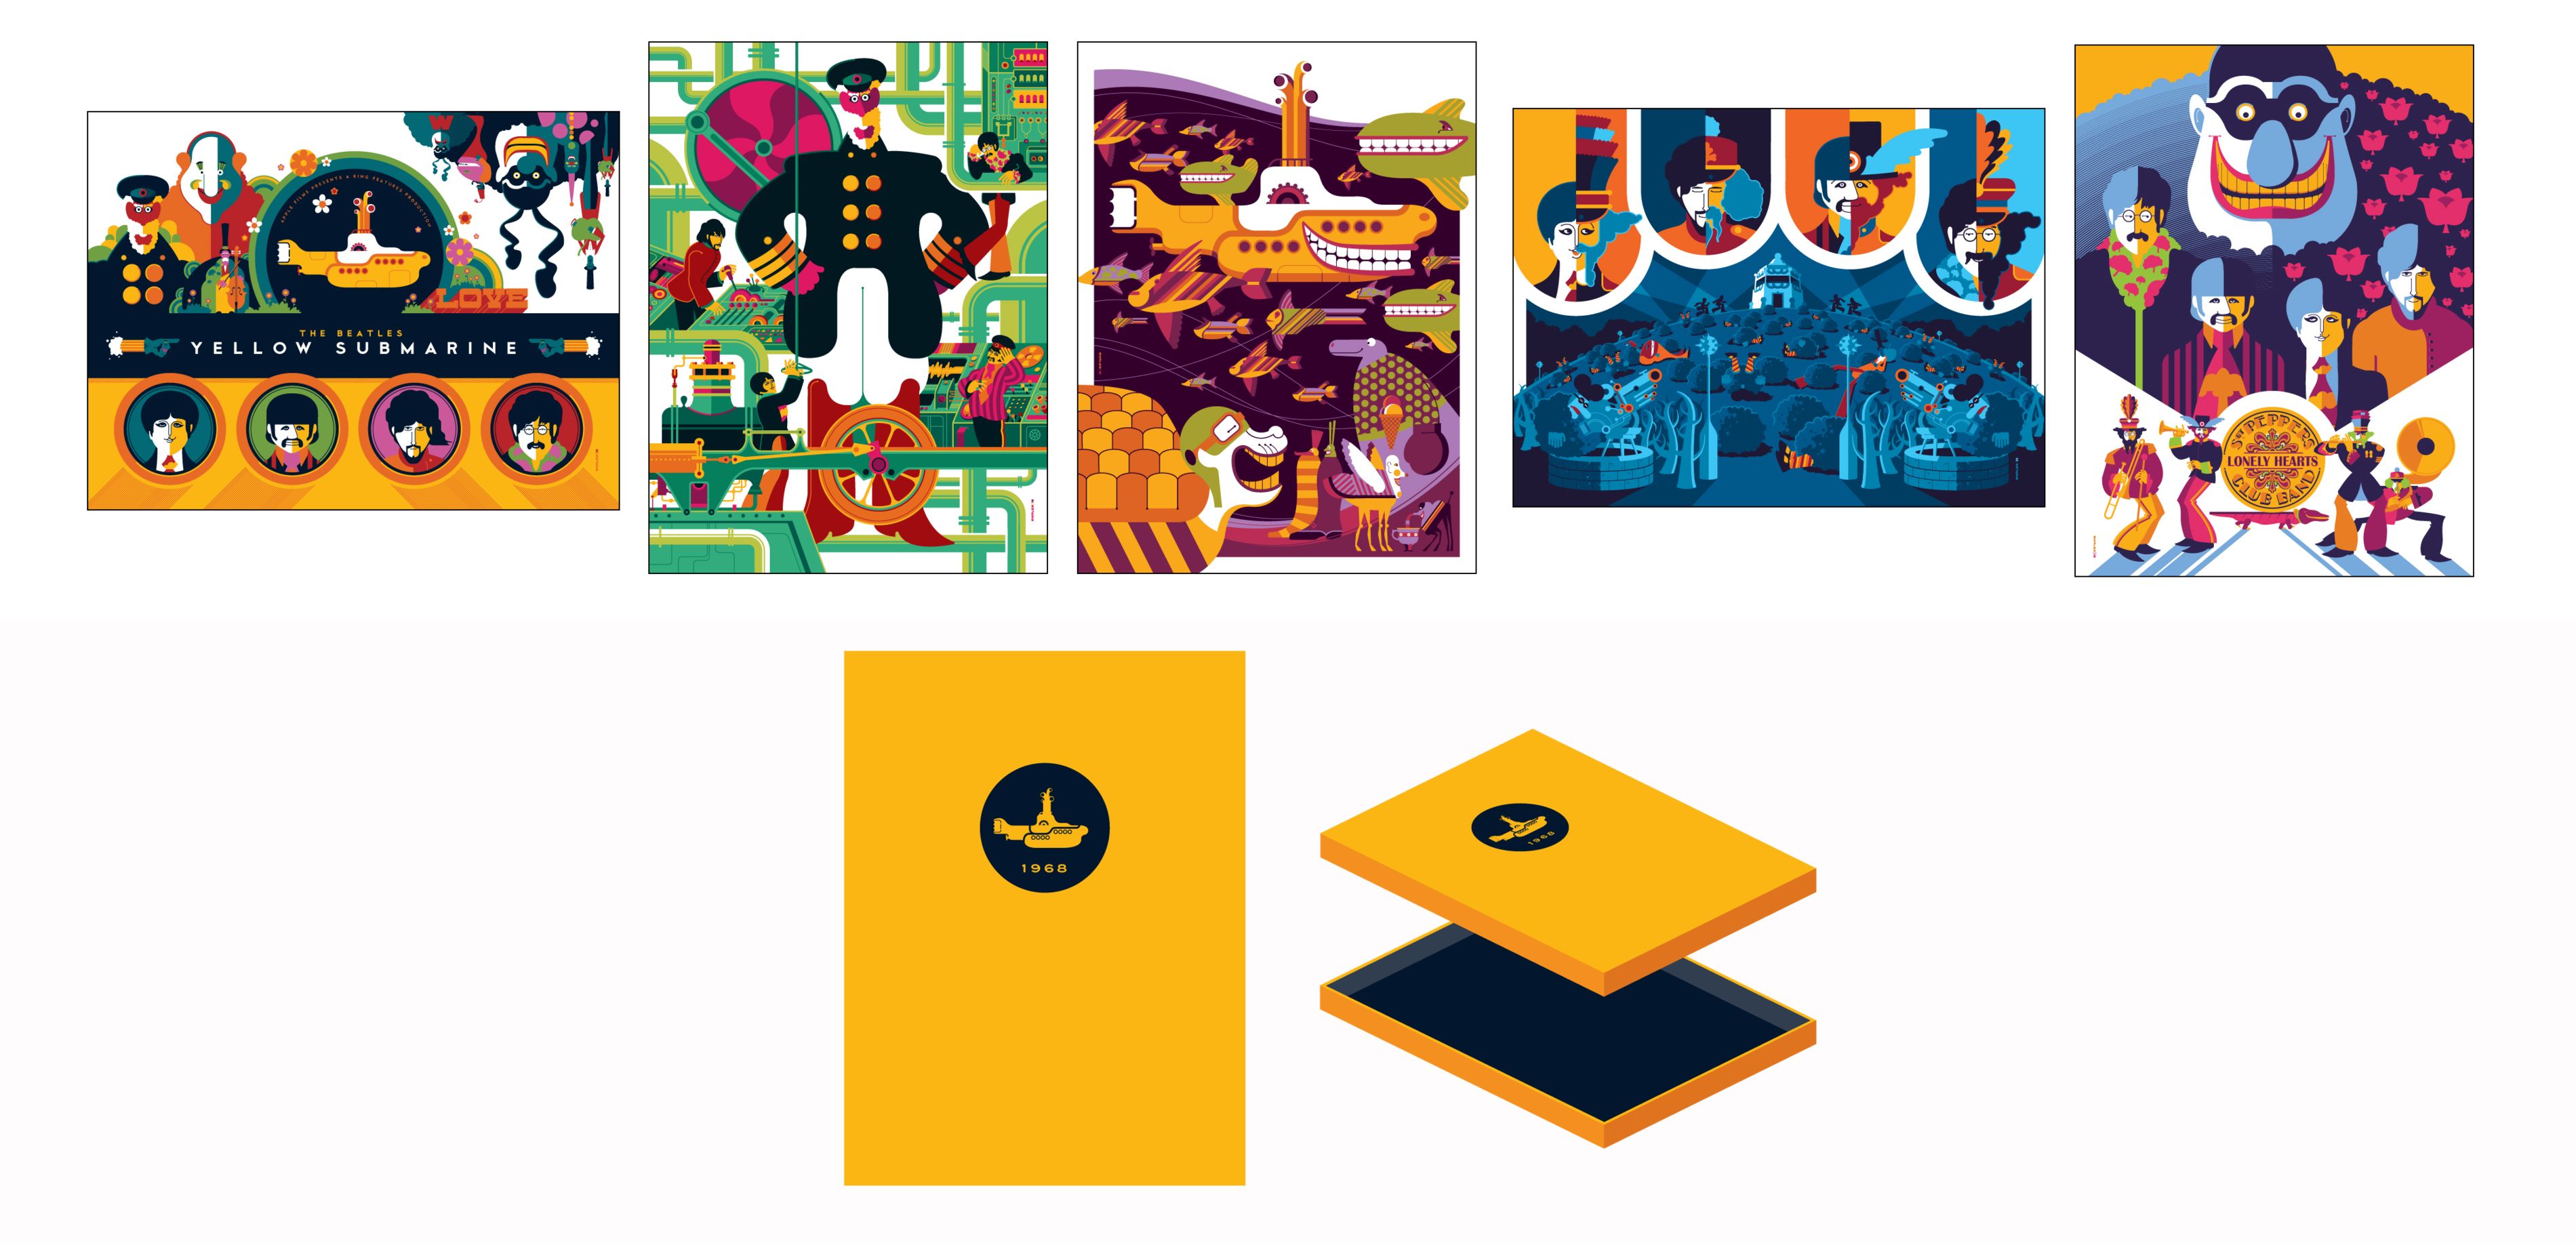 “The Beatles, Yellow Submarine” print set by Tom Whalen | 411posters